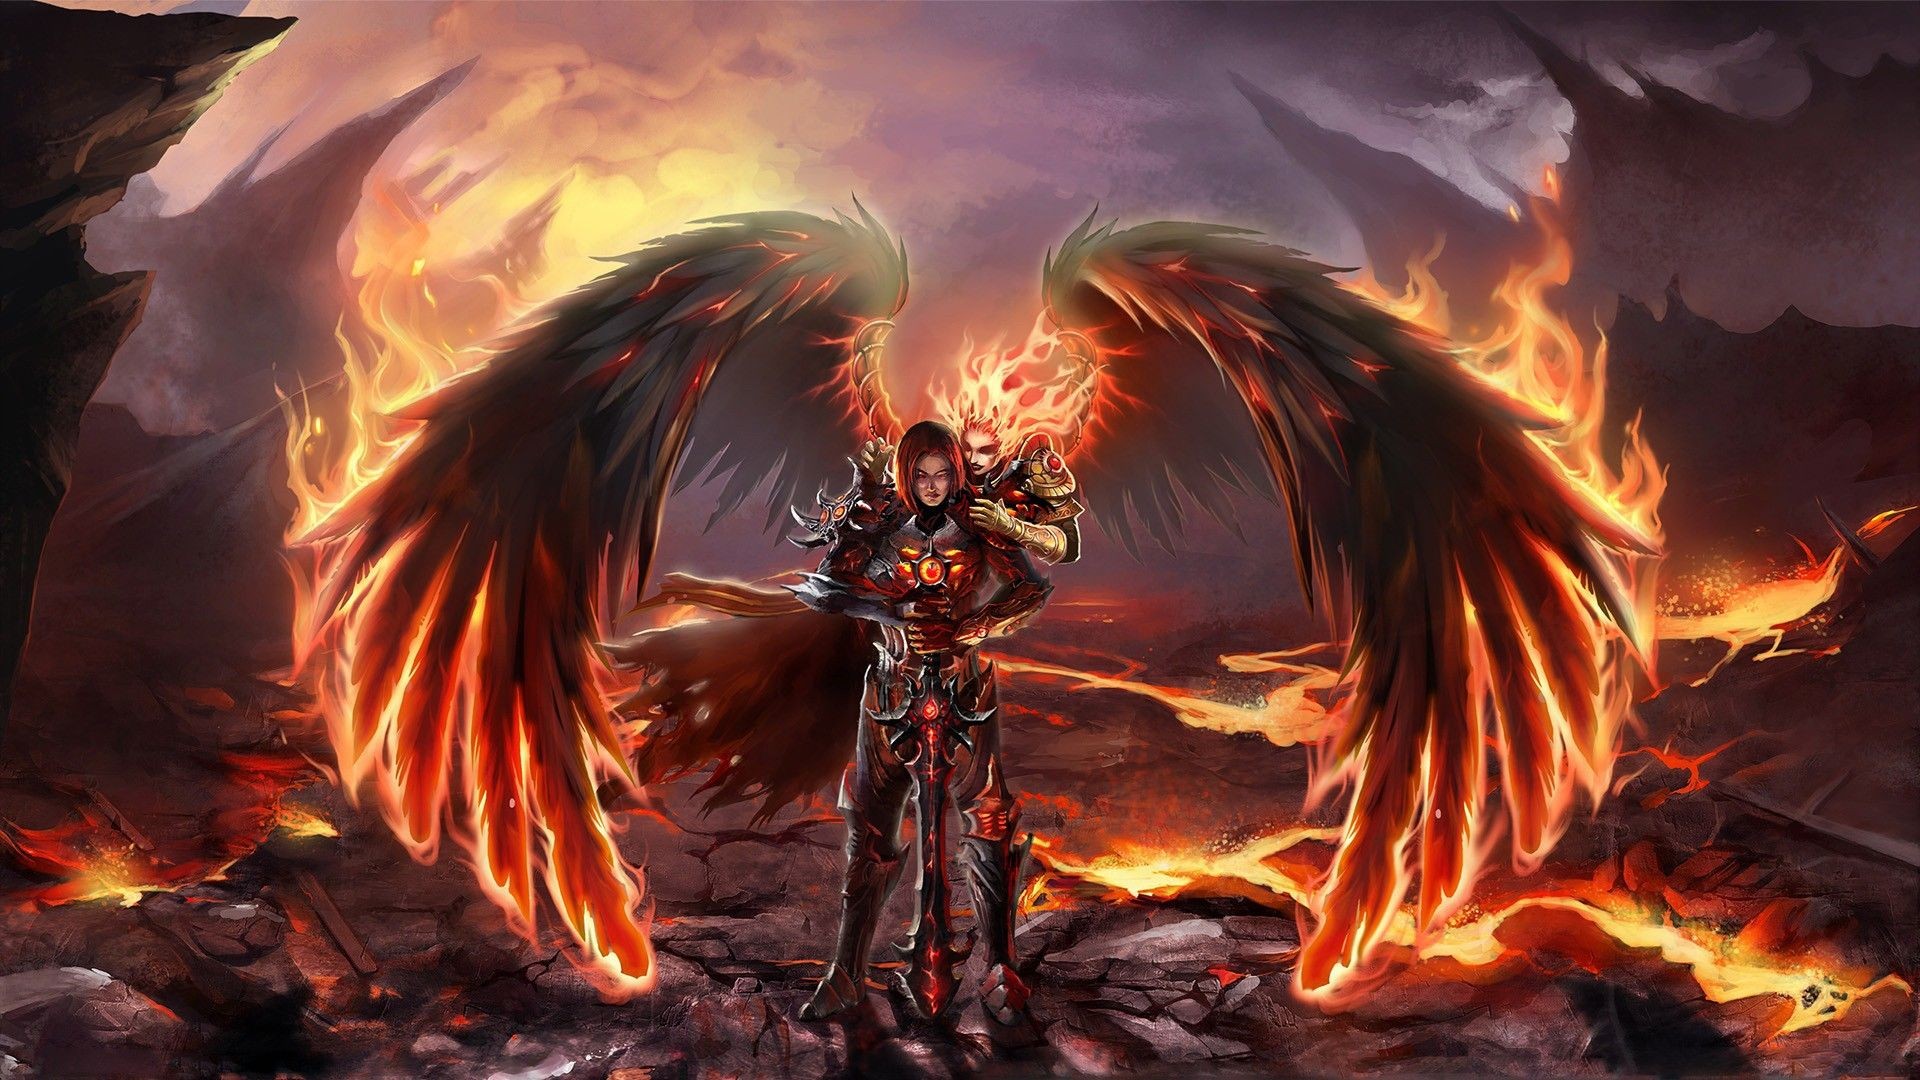 Heroes of Might and Magic VI, Video games, Fantasy girl, Fantasy art, Fire, Wings Wallpaper